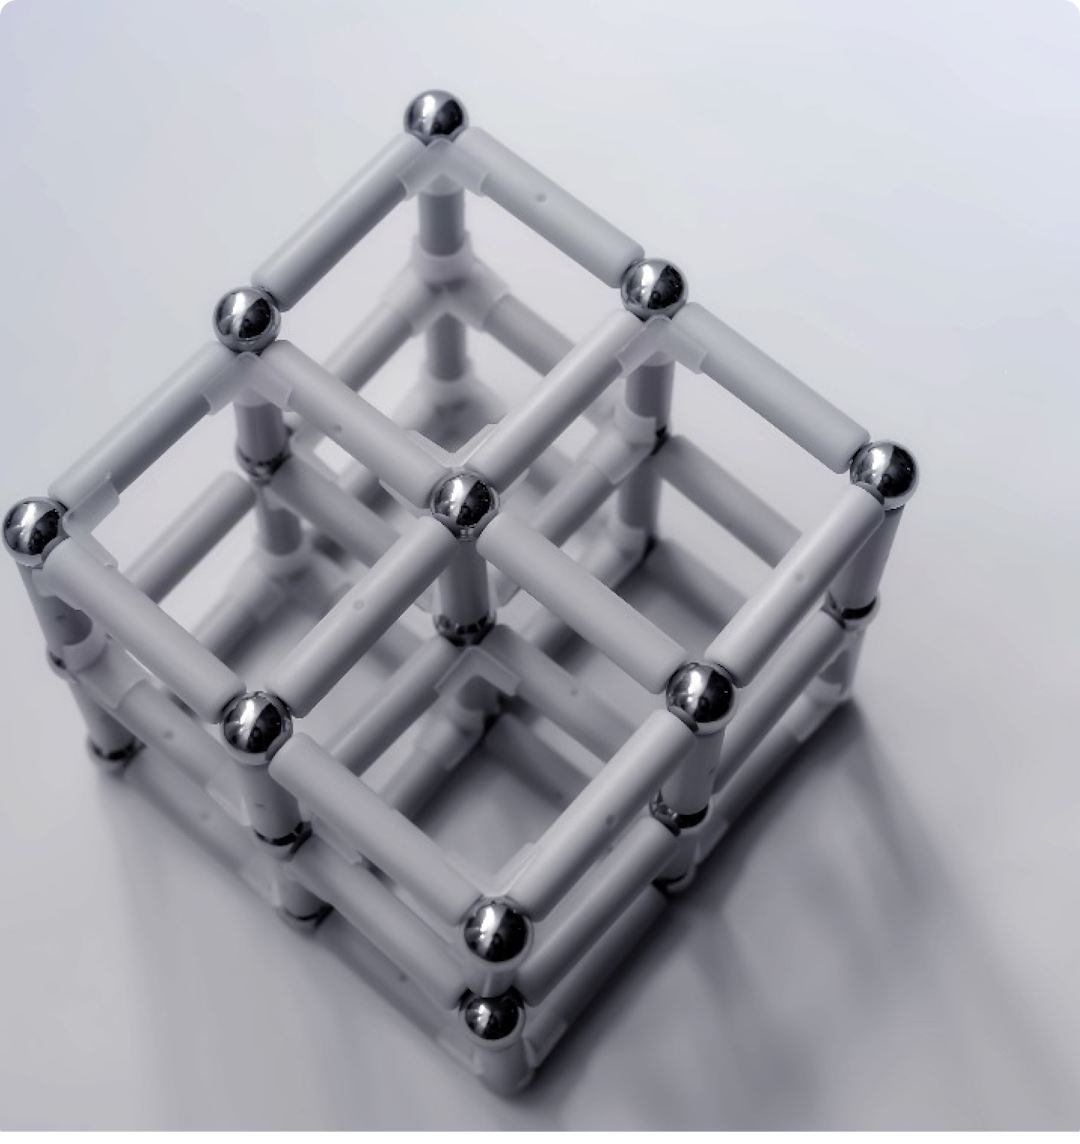 A cube made out of magnets